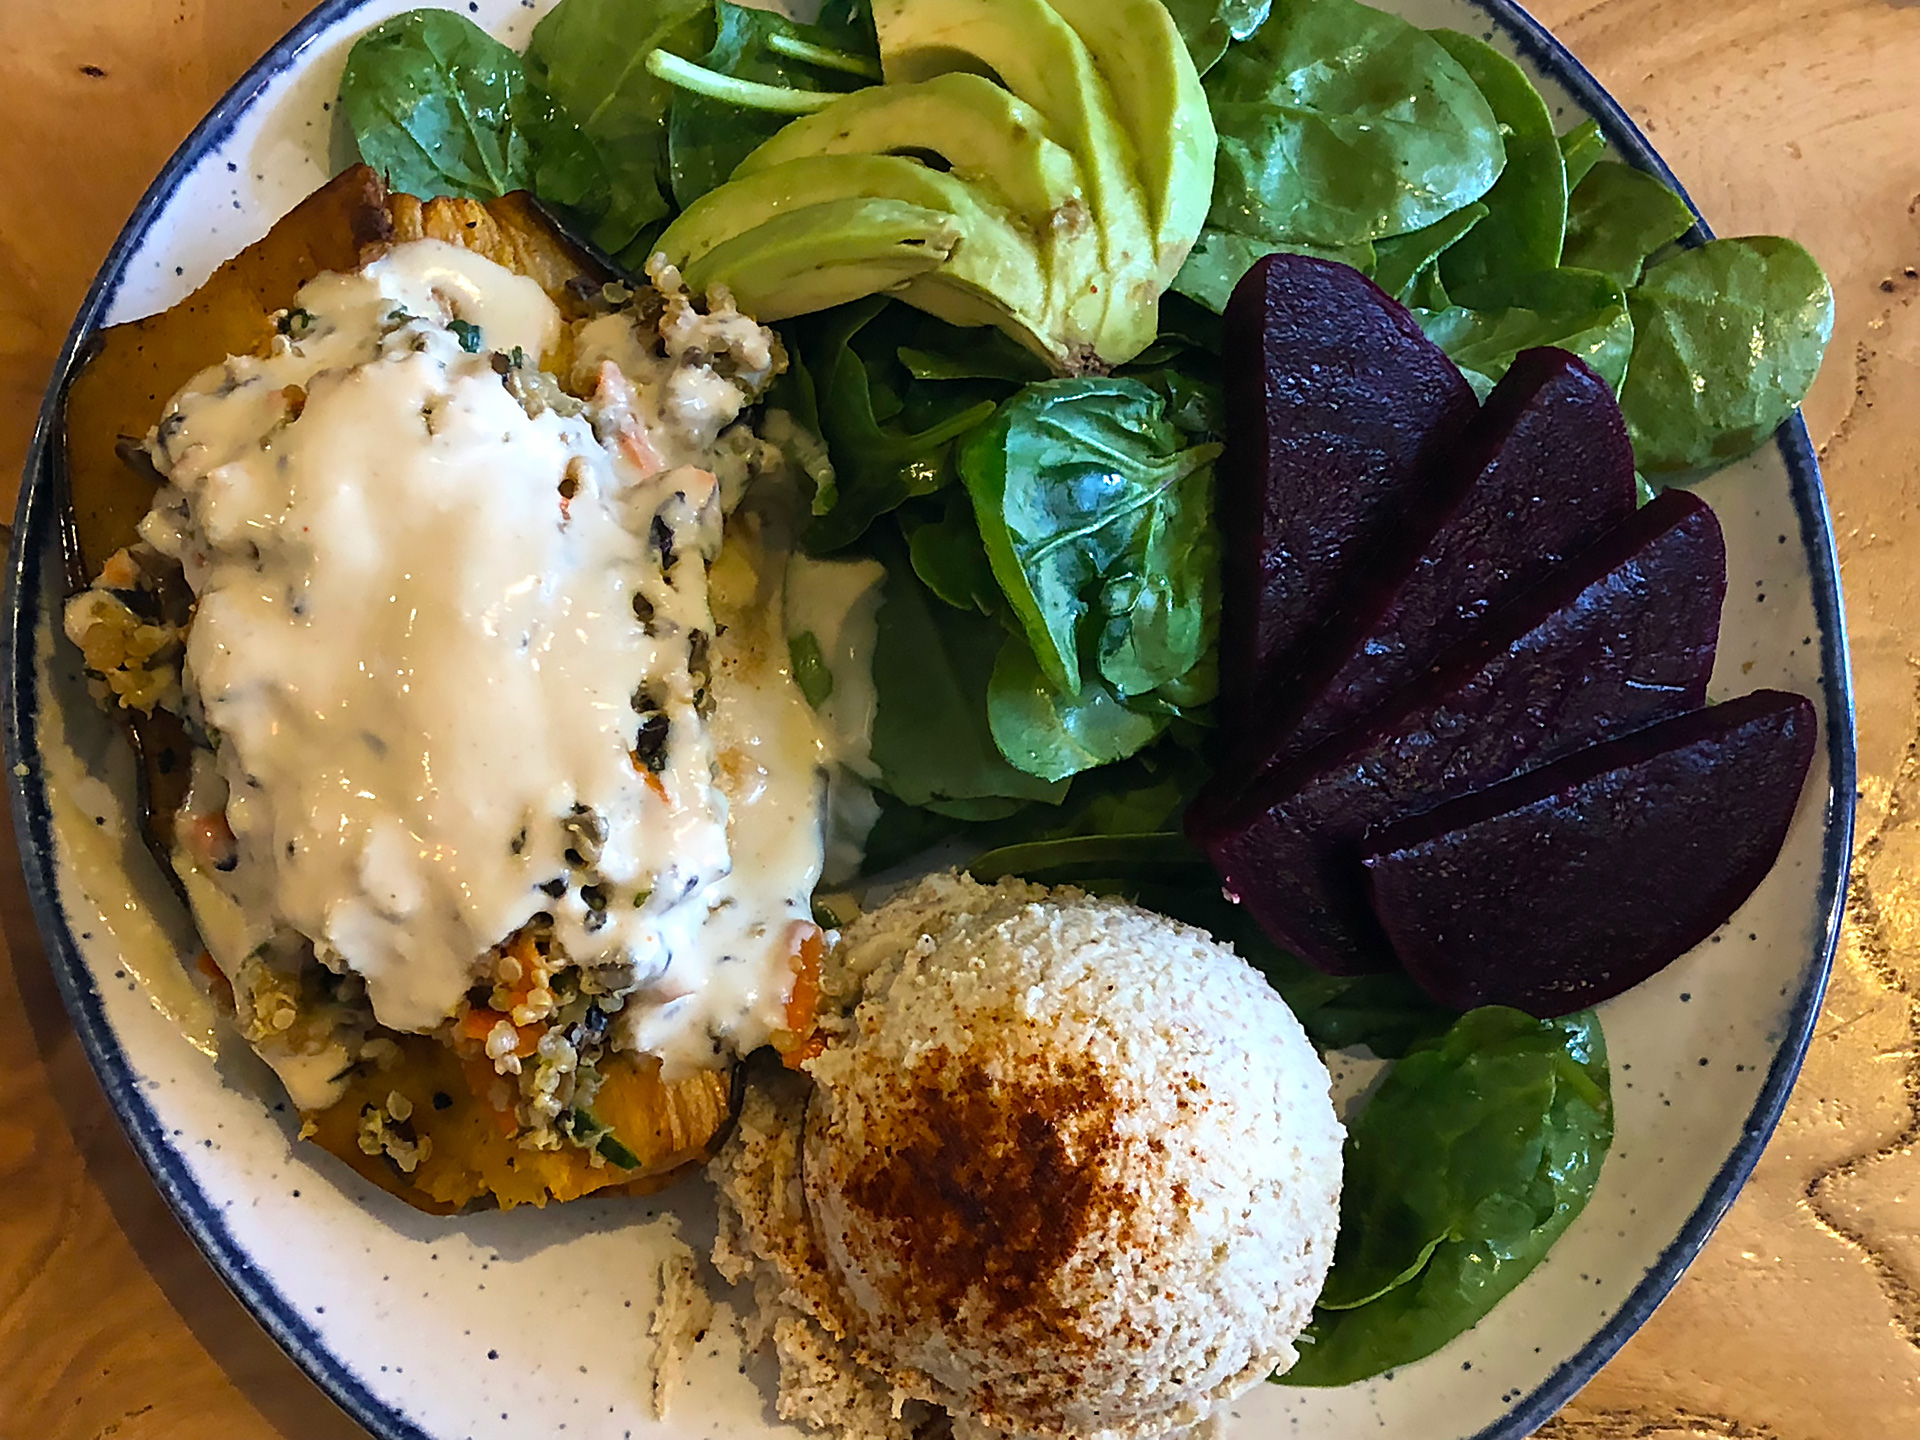 Beloved's Stuffed Delicata Squash ($14): roasted delicata squash stuffed with homemade superfoods quinoa salad, topped with tahini dressing, spinach salad, avocado, beets and hummus.